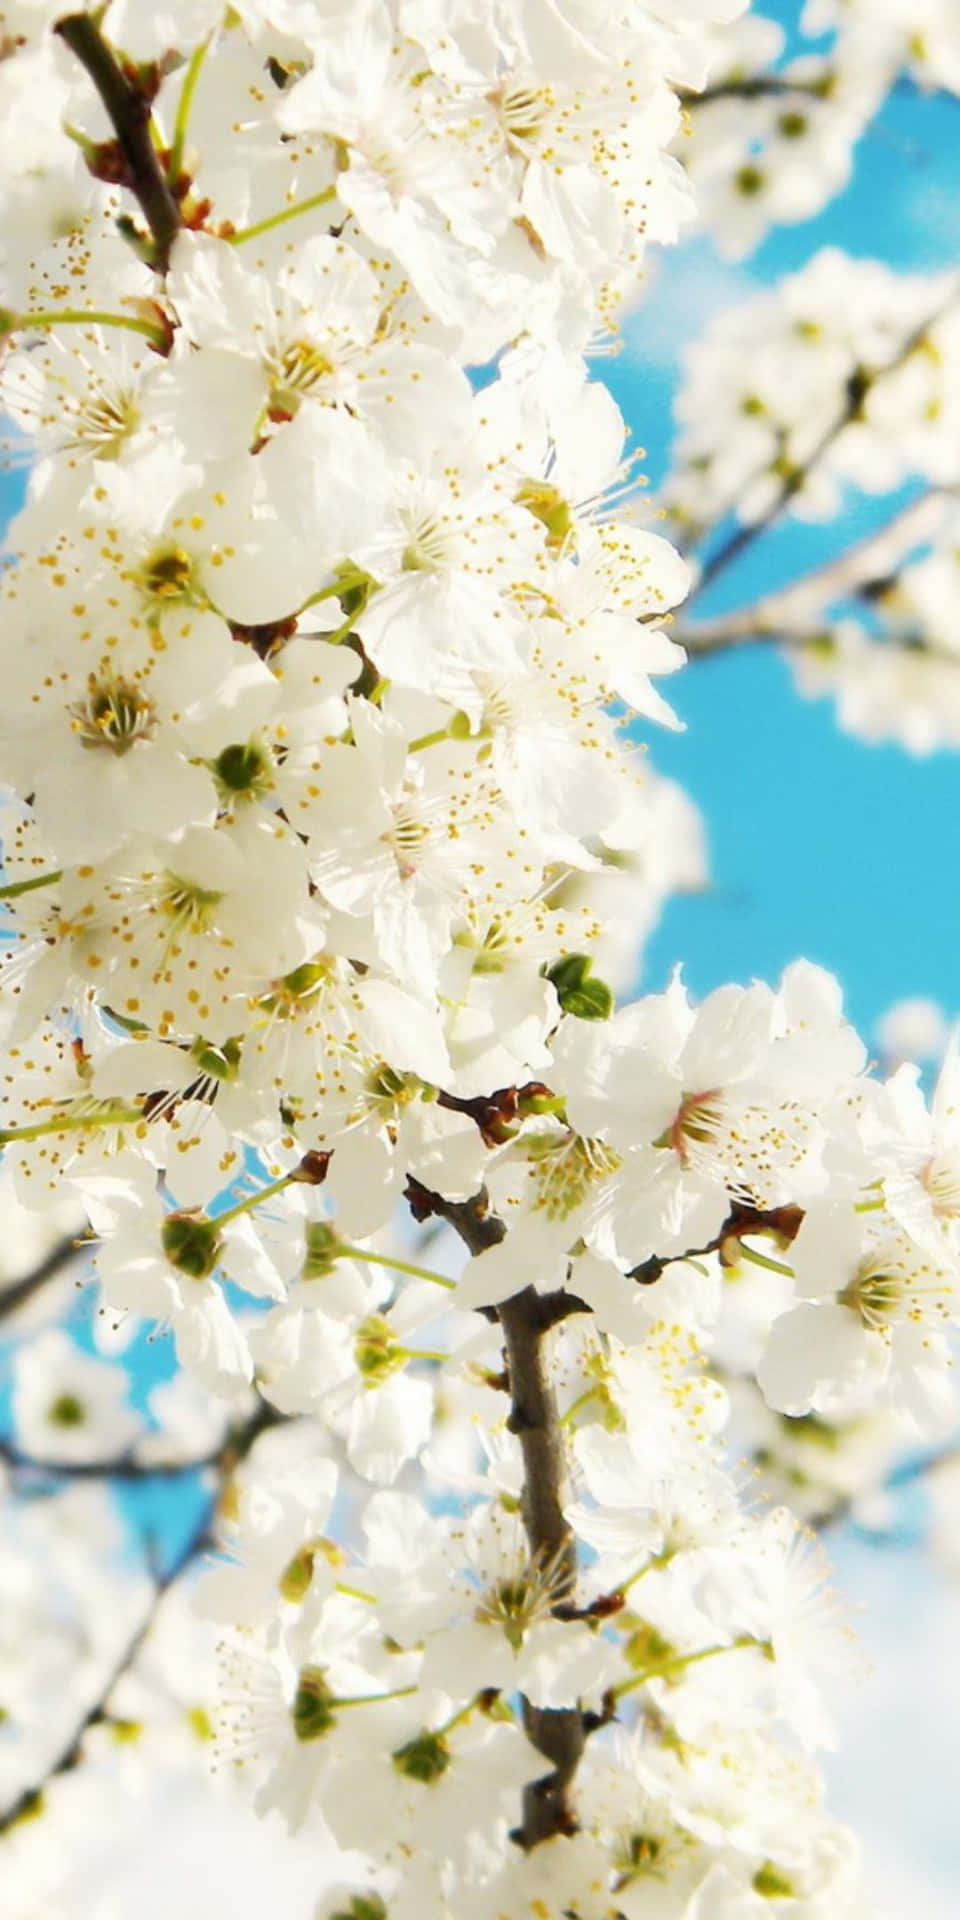 White Cherry Blossoms On A Tree